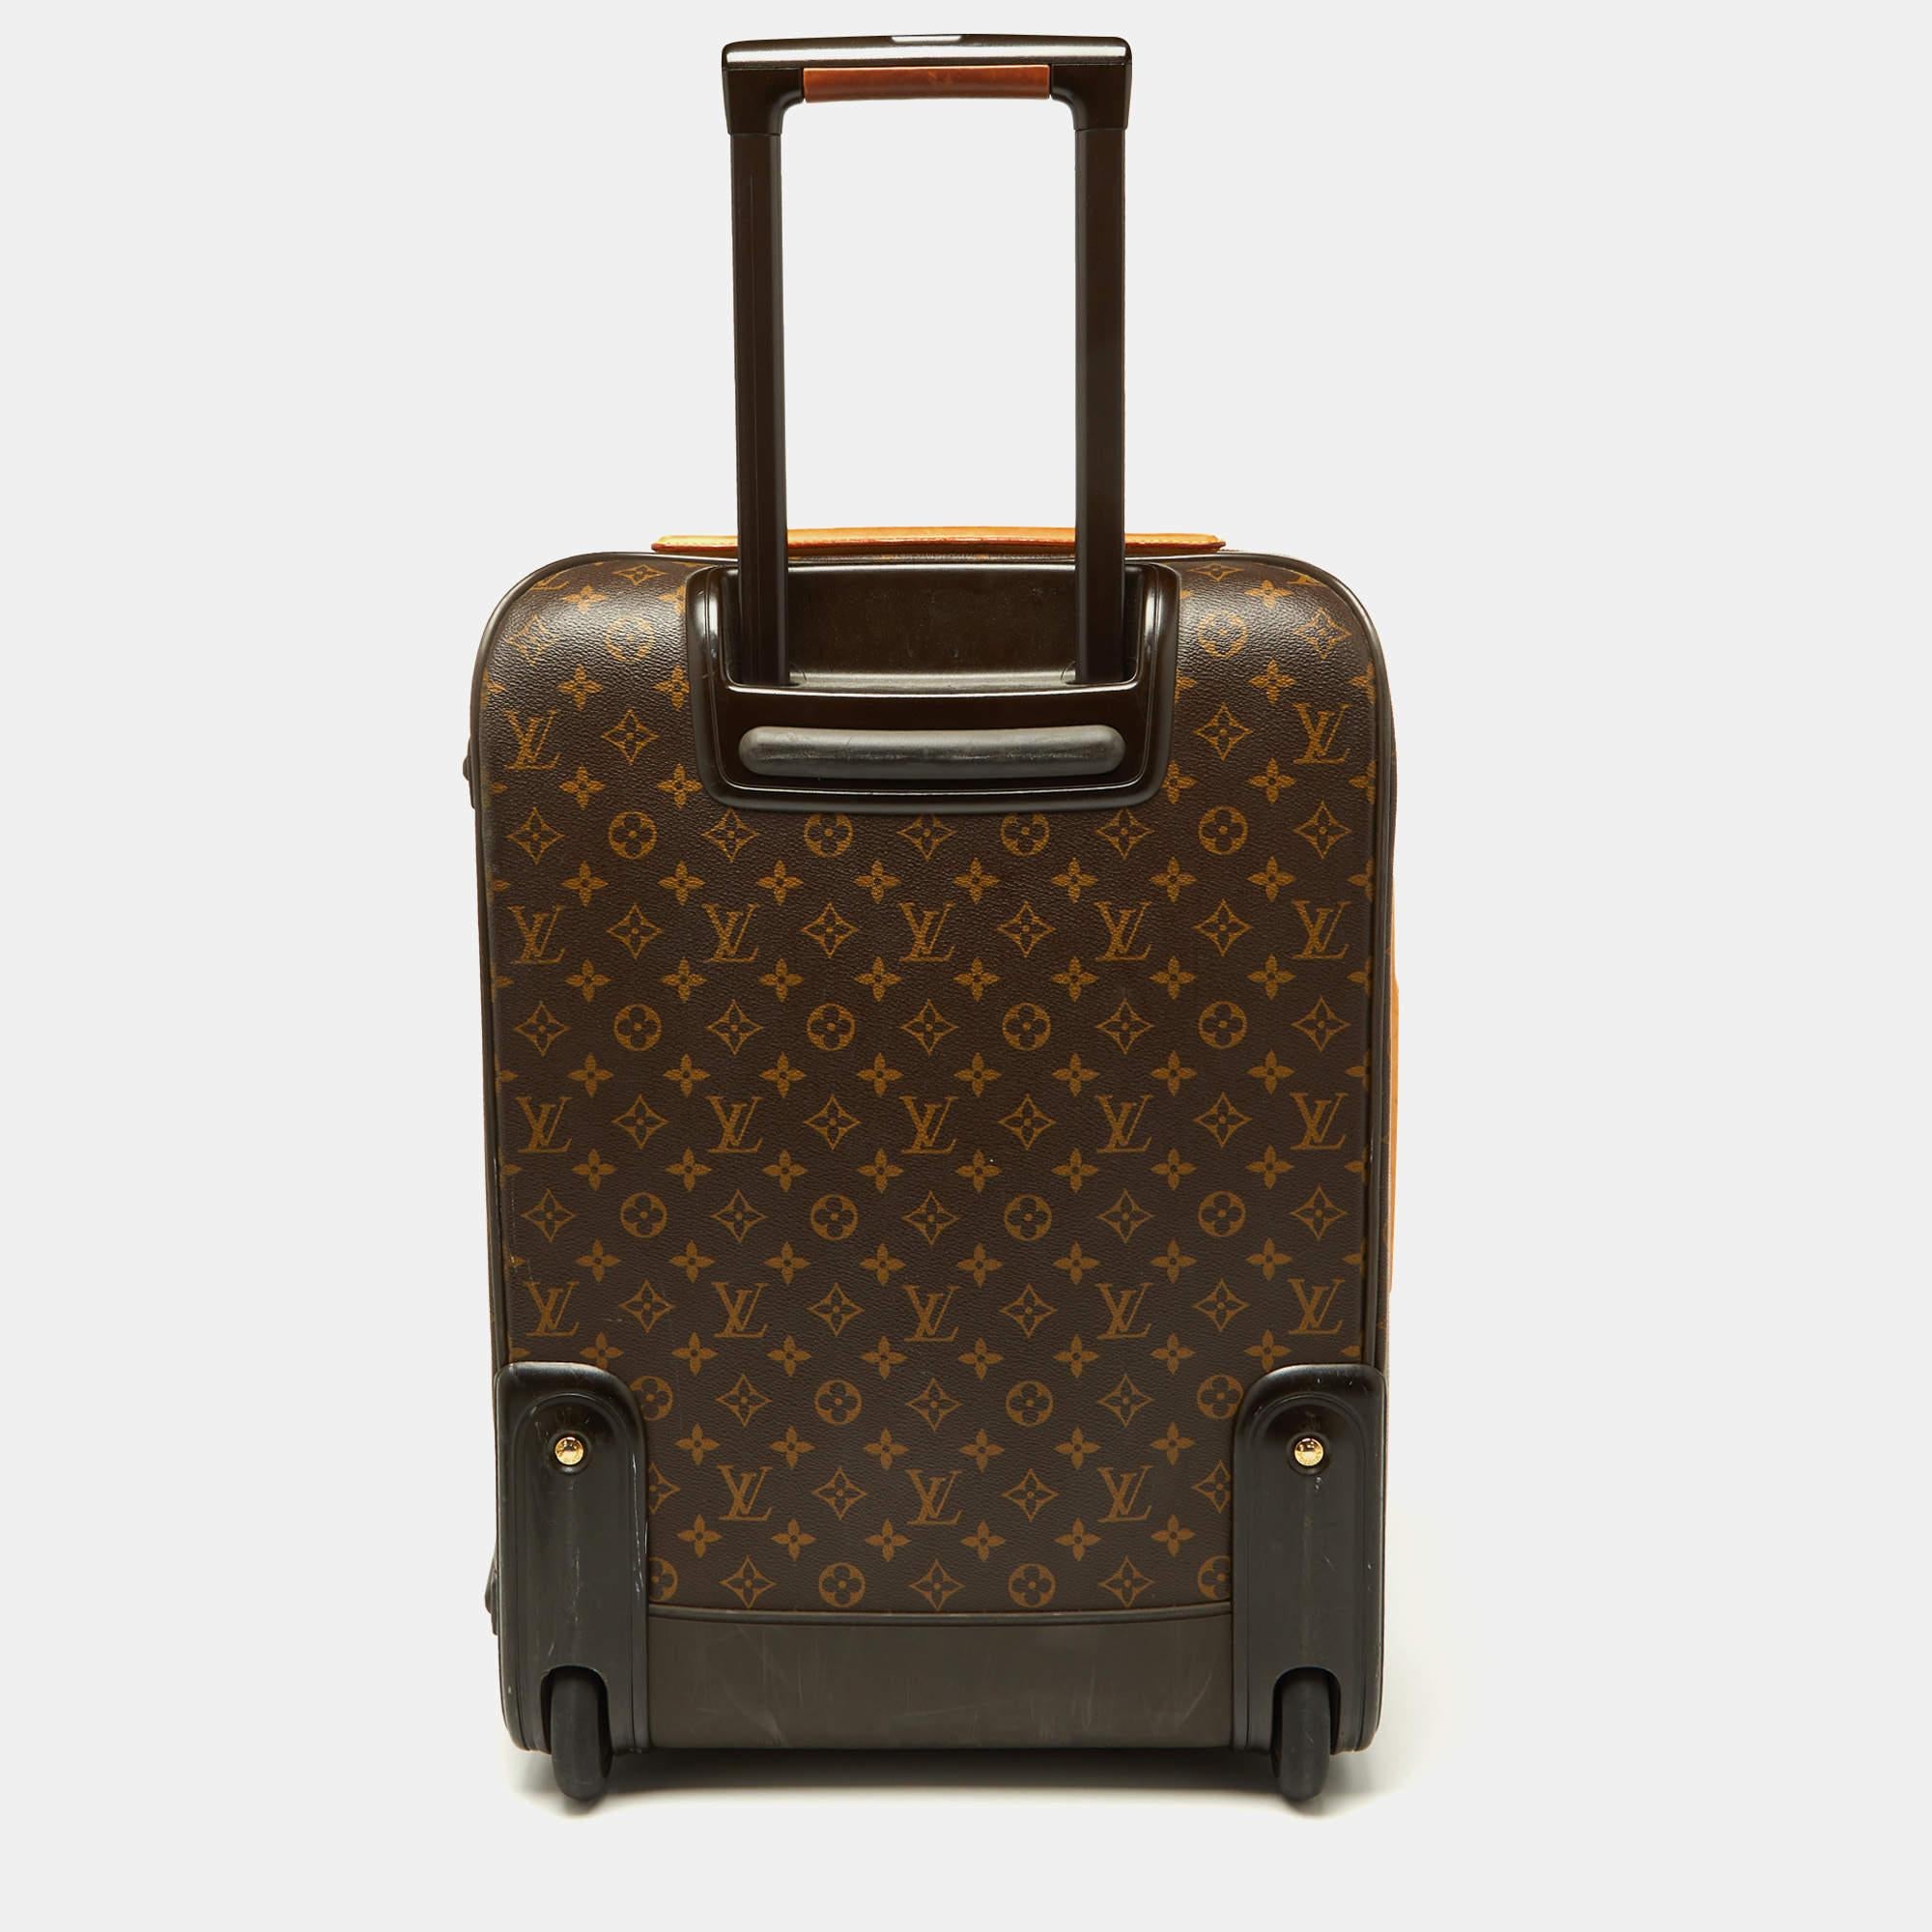 Taking Louis Vuitton's legendary art of travel elegantly forward, the Business Pegase Legere 55 suitcase, crafted from Monogram canvas and leather, flaunts traditional craftsmanship and an innovative, modern design. Lightweight, robust, and